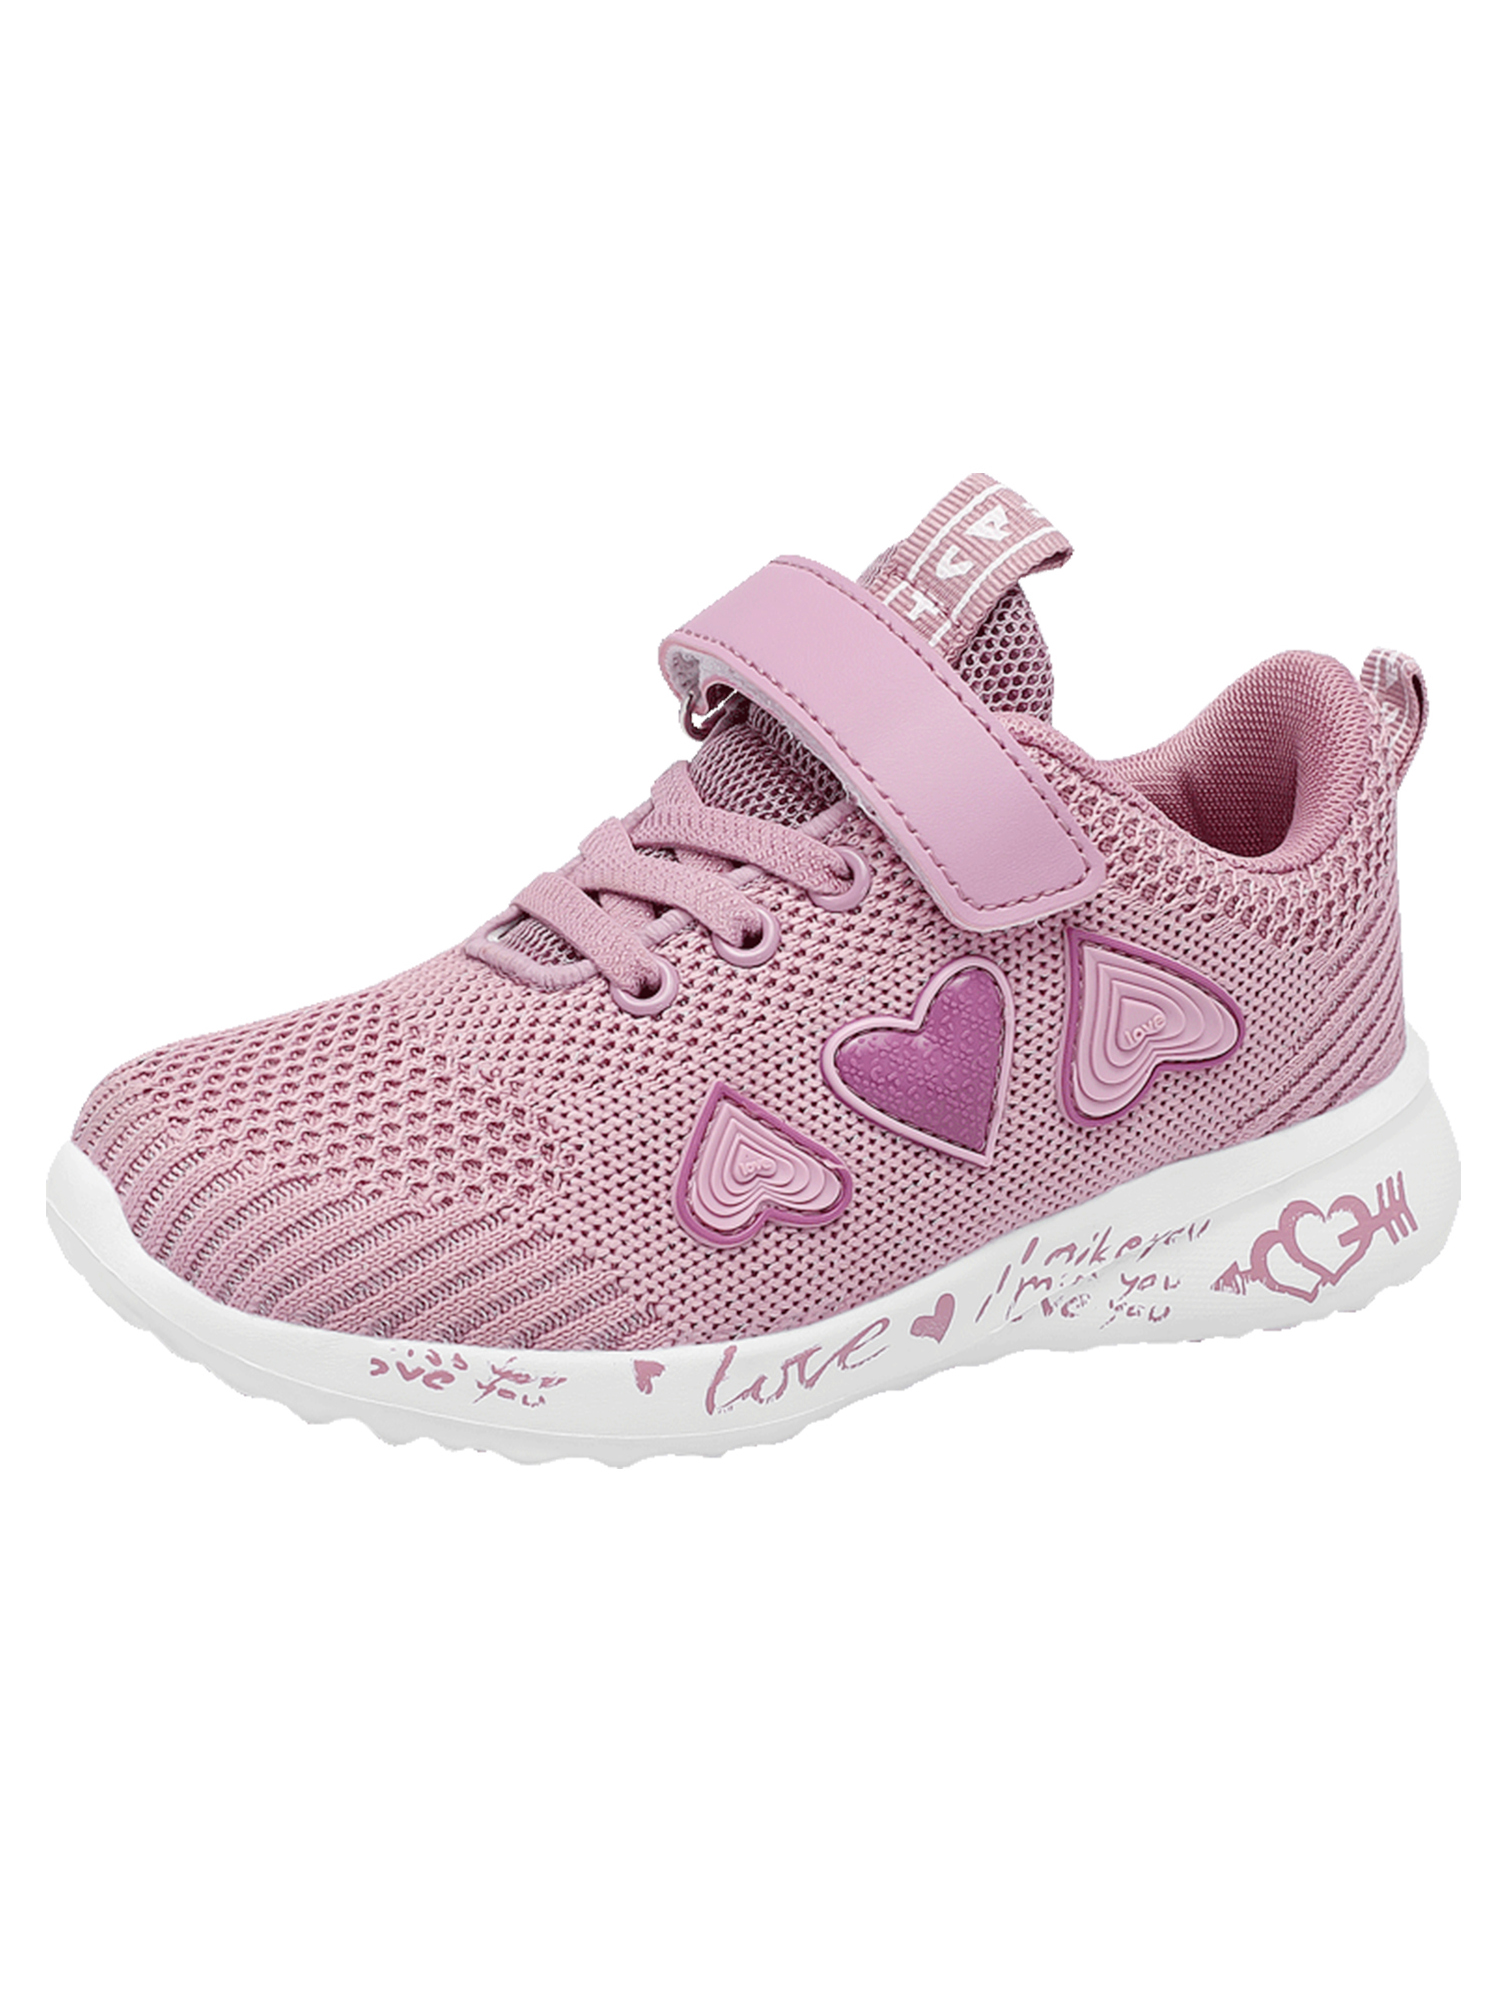 Tanleewa Lovely Girls Sports Shoes Kids Breathable Sneakers Lightweight Casual Shoe Size 3 - image 4 of 7